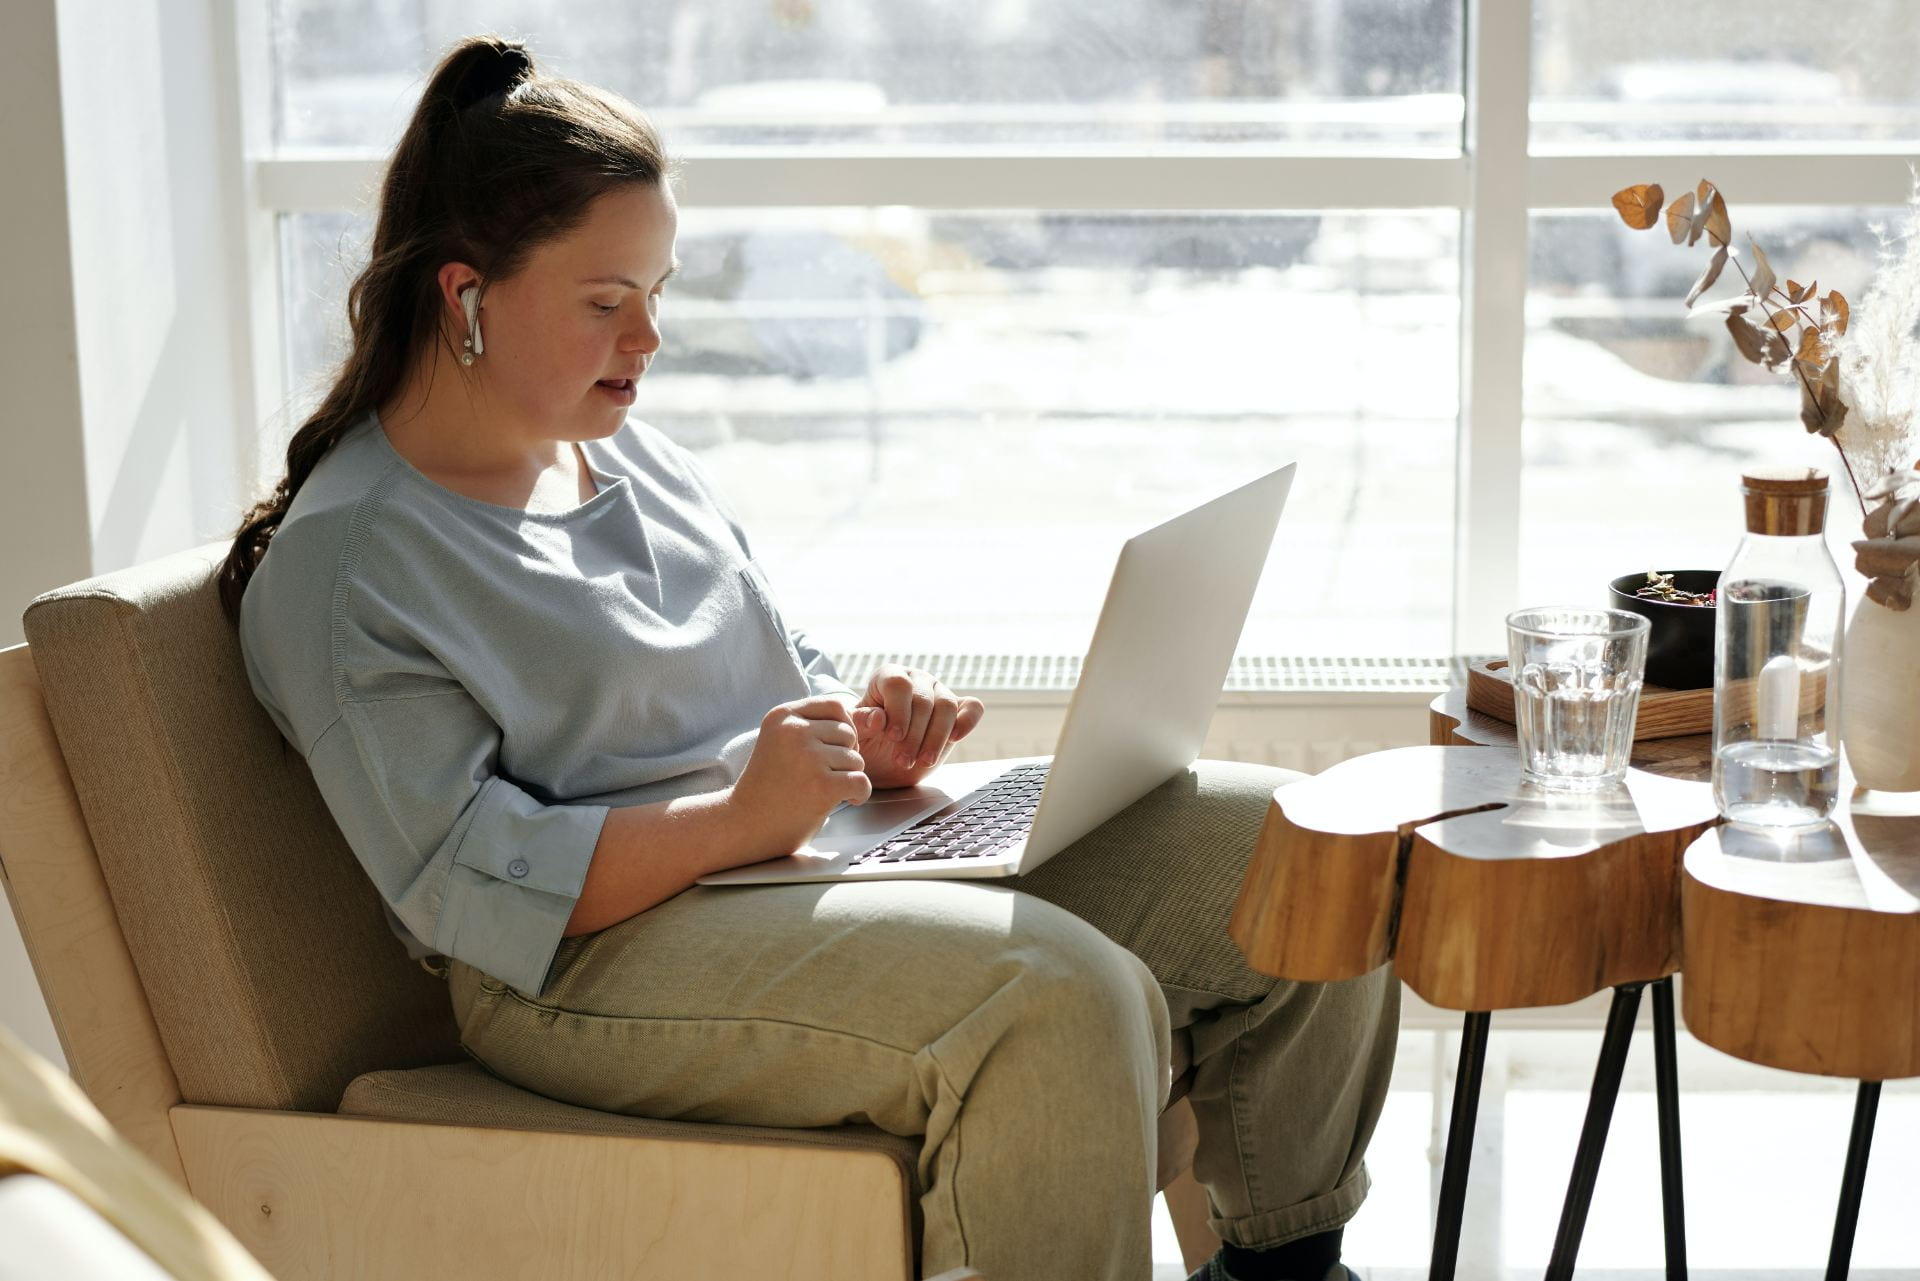 Female sitting at a laptop with earbuds in.